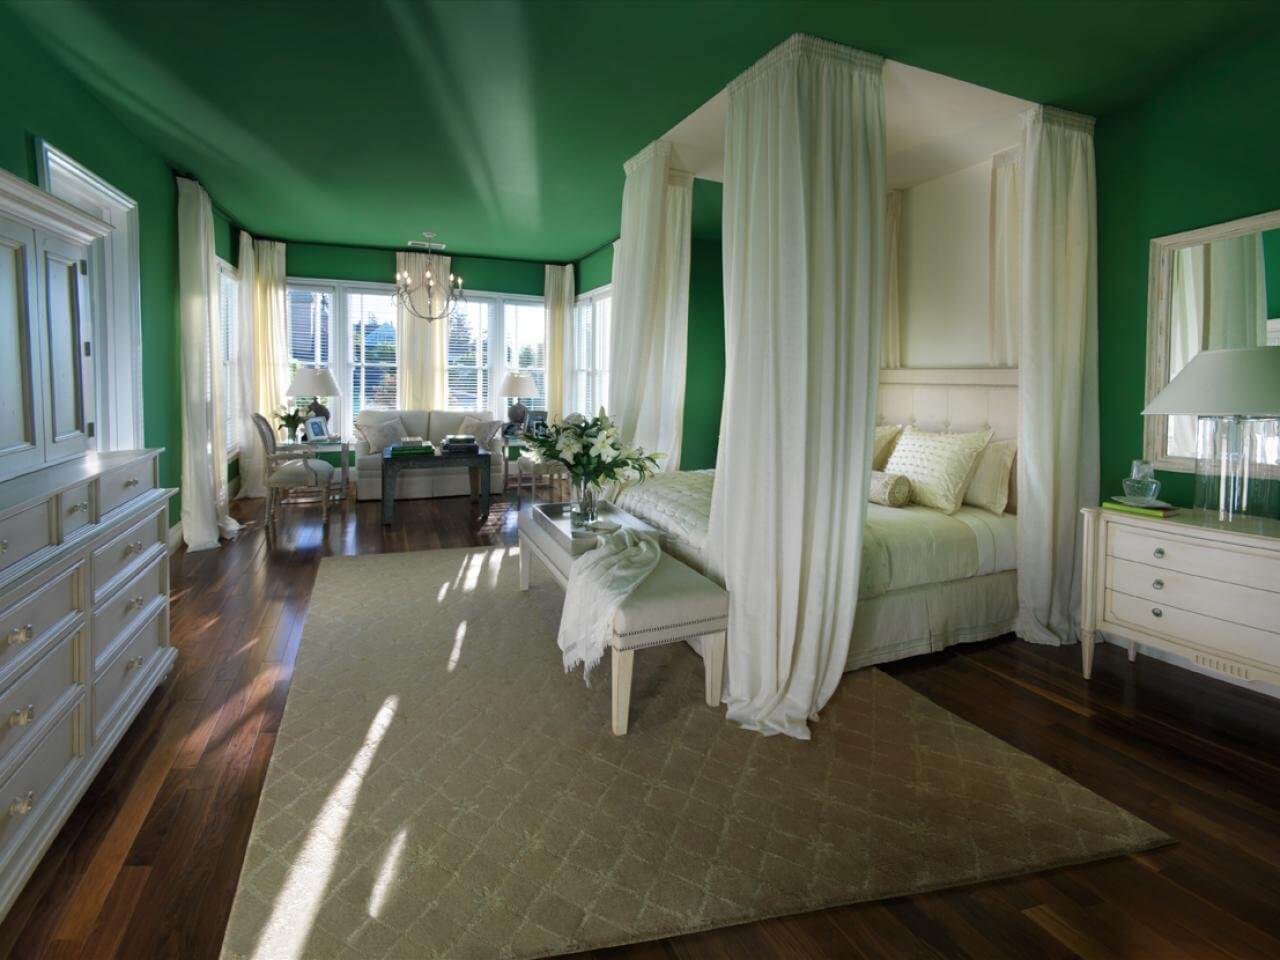 10- GLOSSY GREEN CEILING IN A LARGE BEDROOM